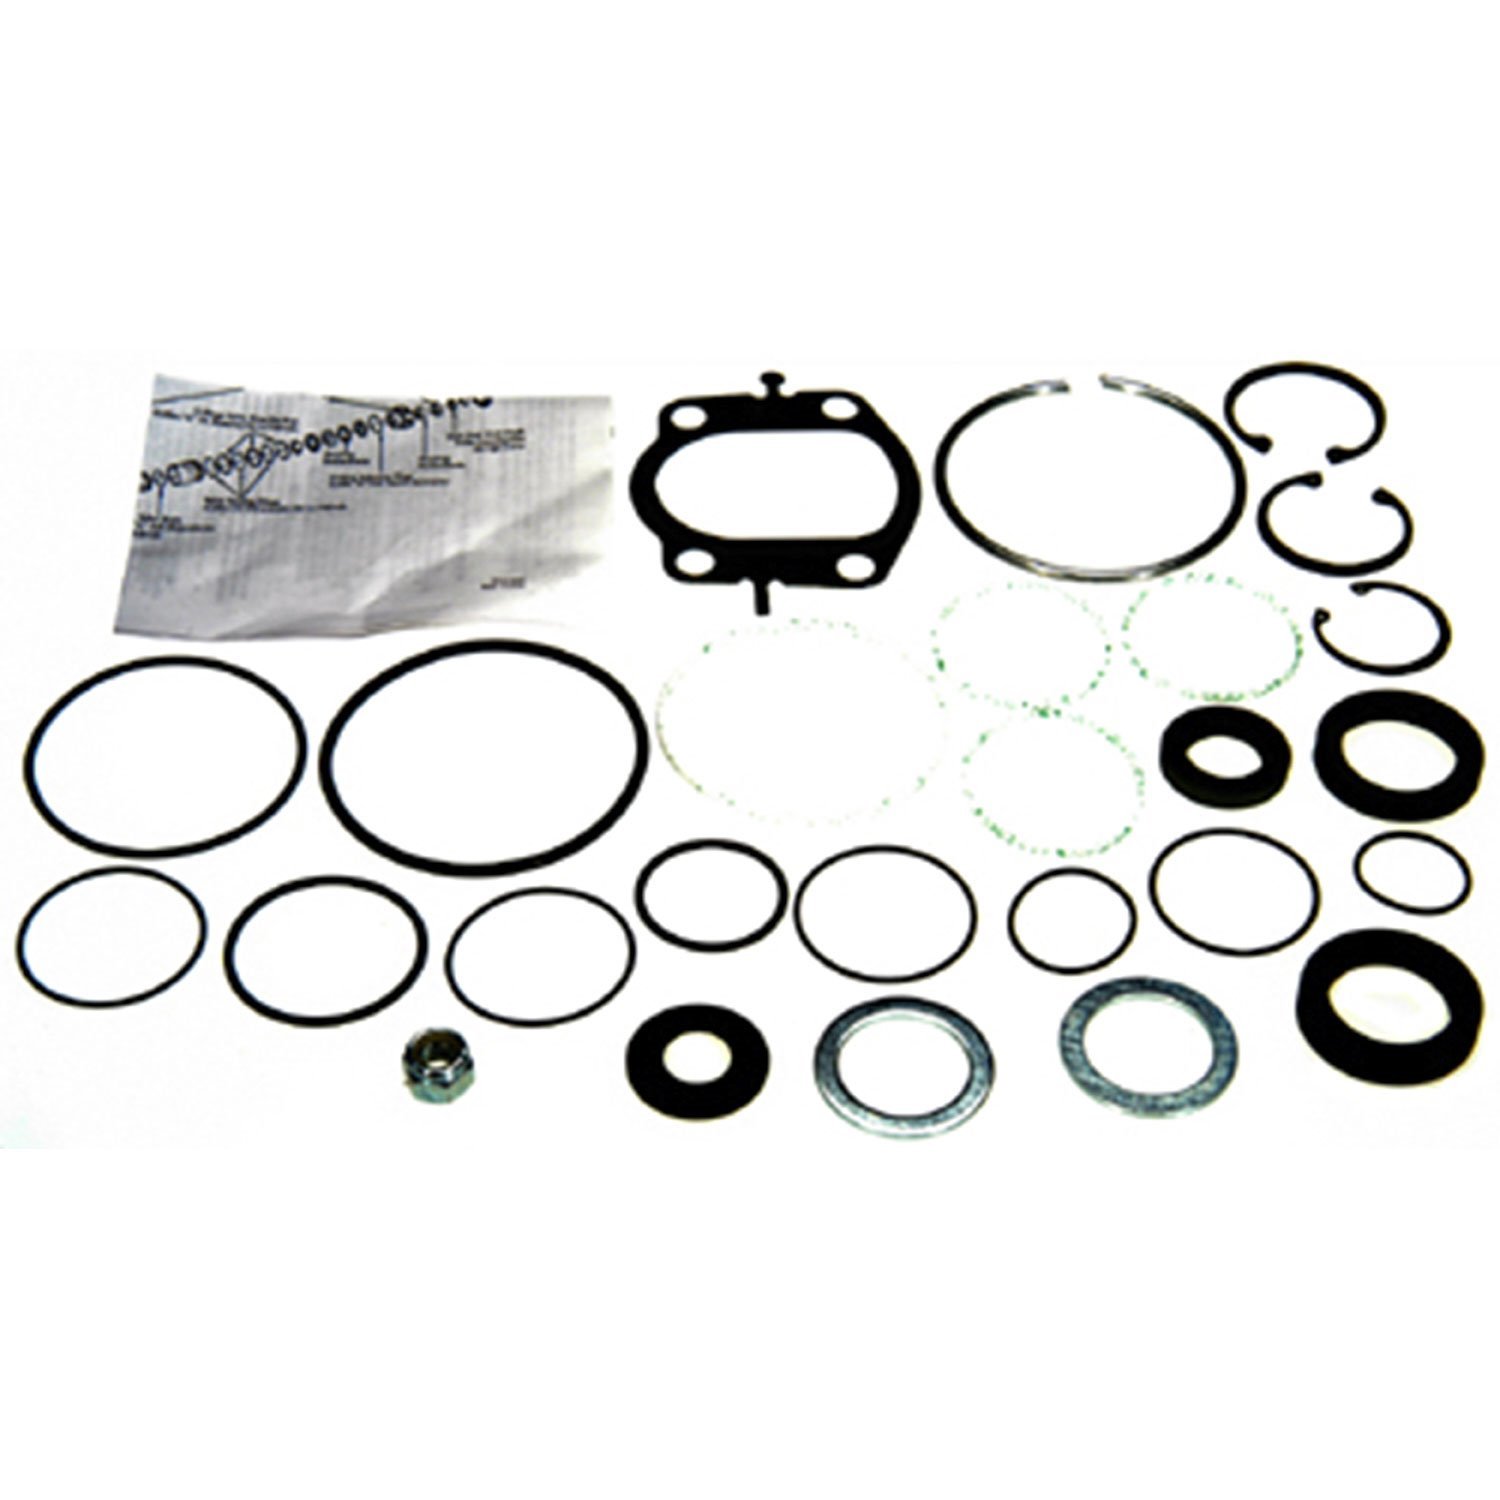 Power Steering Repair Kit for Select 1959-1999 Buick, Cadillac, Chevrolet, Dodge, Ford, GMC, Jeep, Oldsmobile, Pontiac